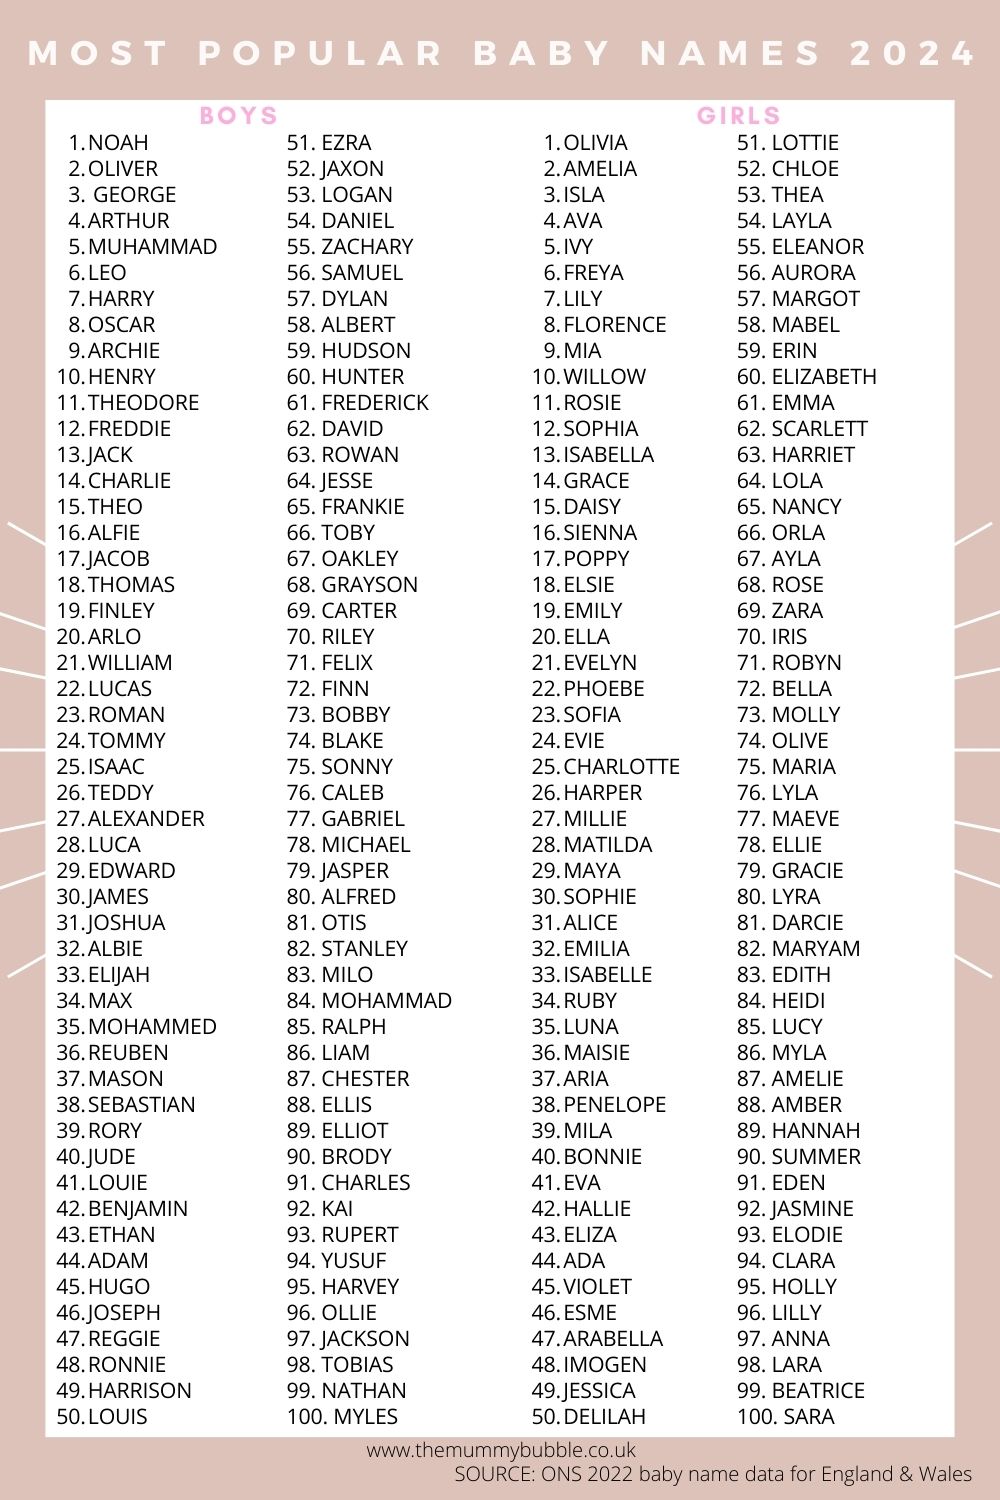 top 100 most popular baby boy and girl names according to ONS data